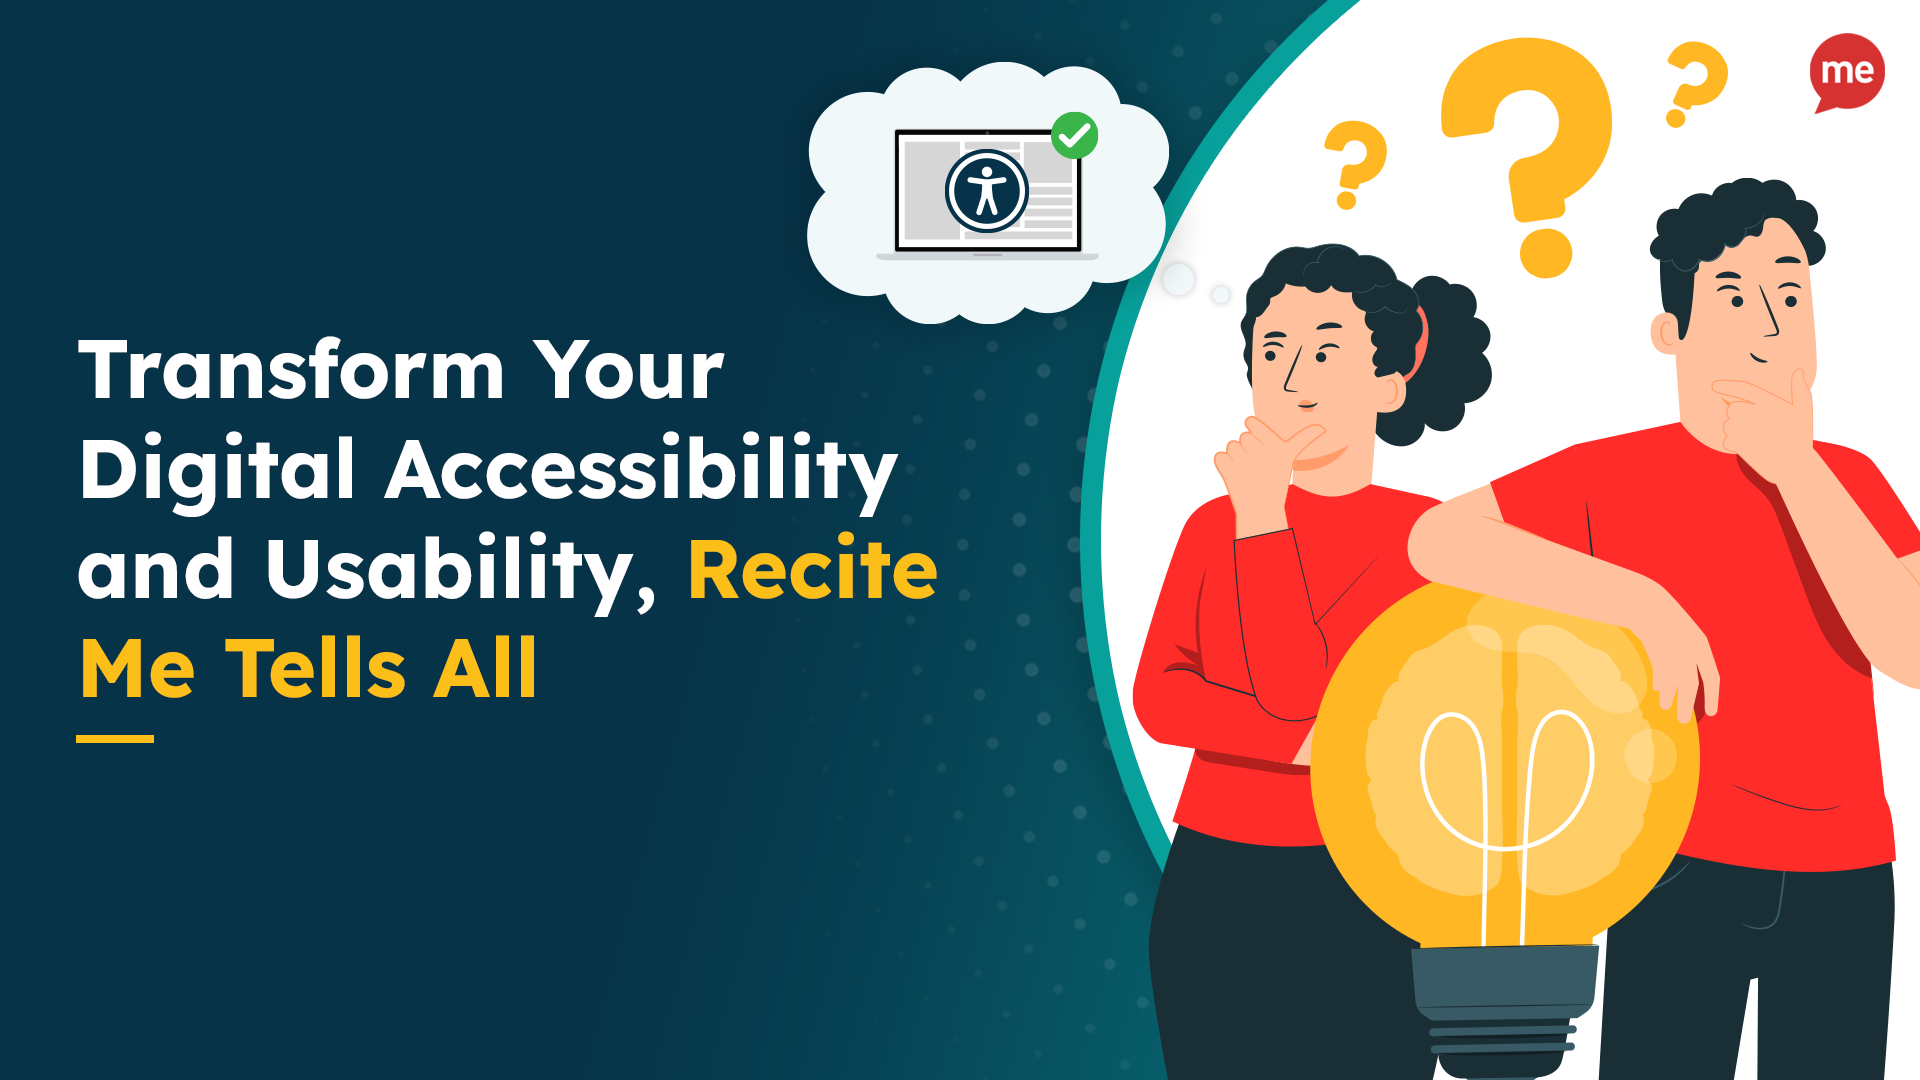 Transform Your Digital Accessibility and Usability, Recite Me Tell All